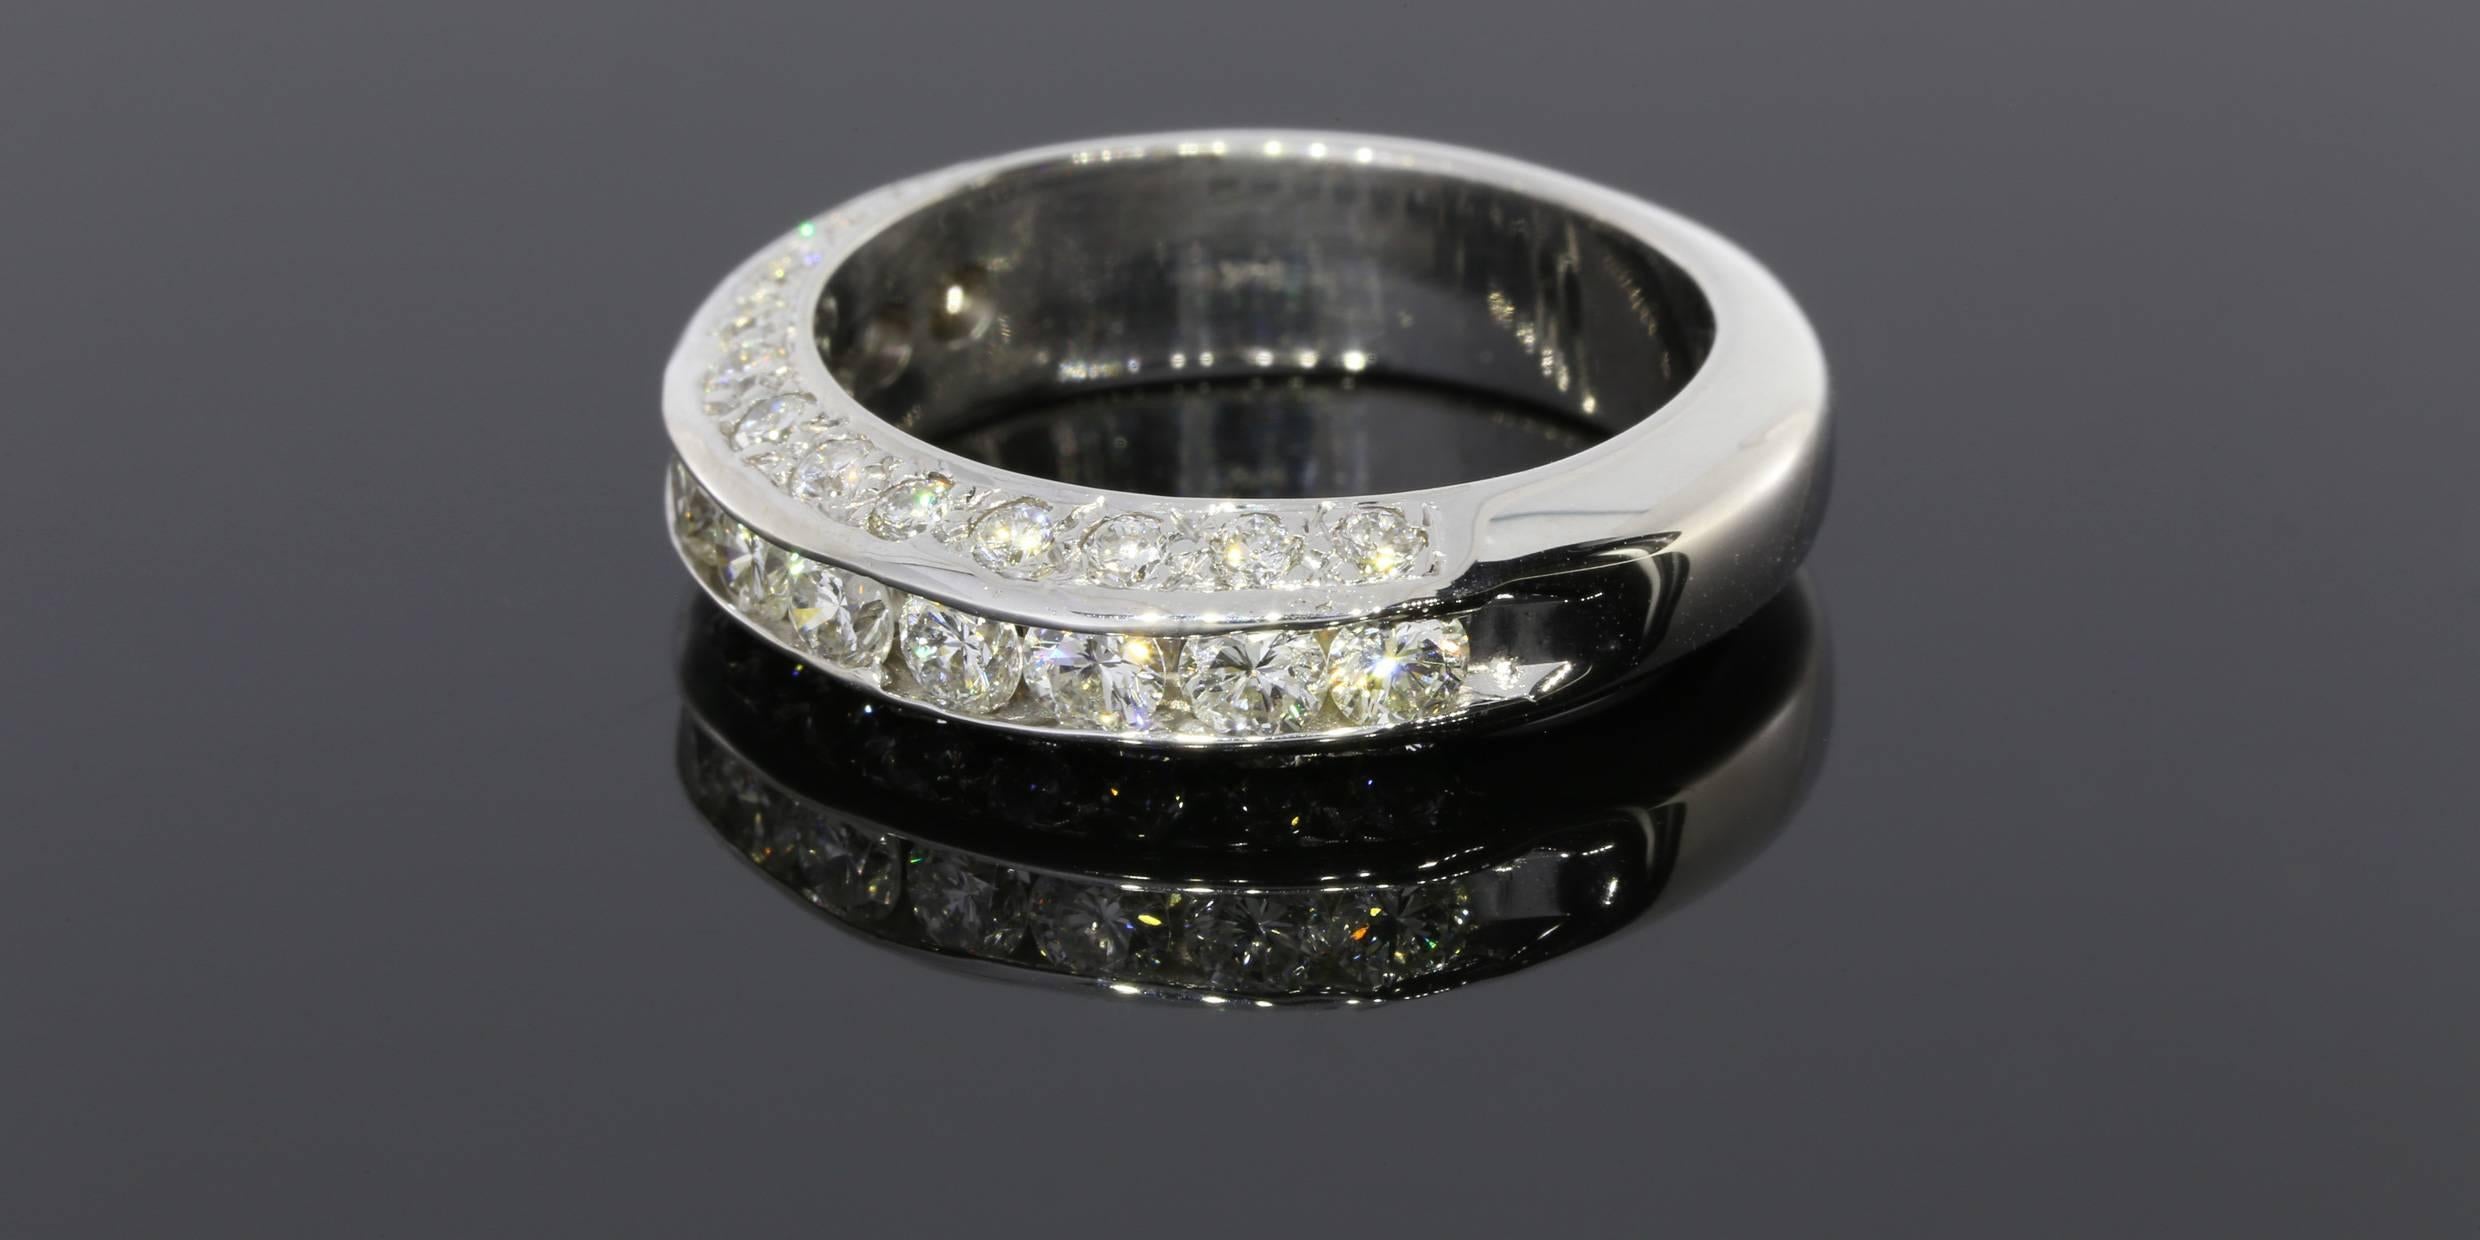 This gorgeous ring sparkles from all sides & is just breathtaking! The center row features larger round brilliant cut diamonds that are channel set, & the sides feature smaller round brilliant diamonds that are bead set. All these beautiful diamonds